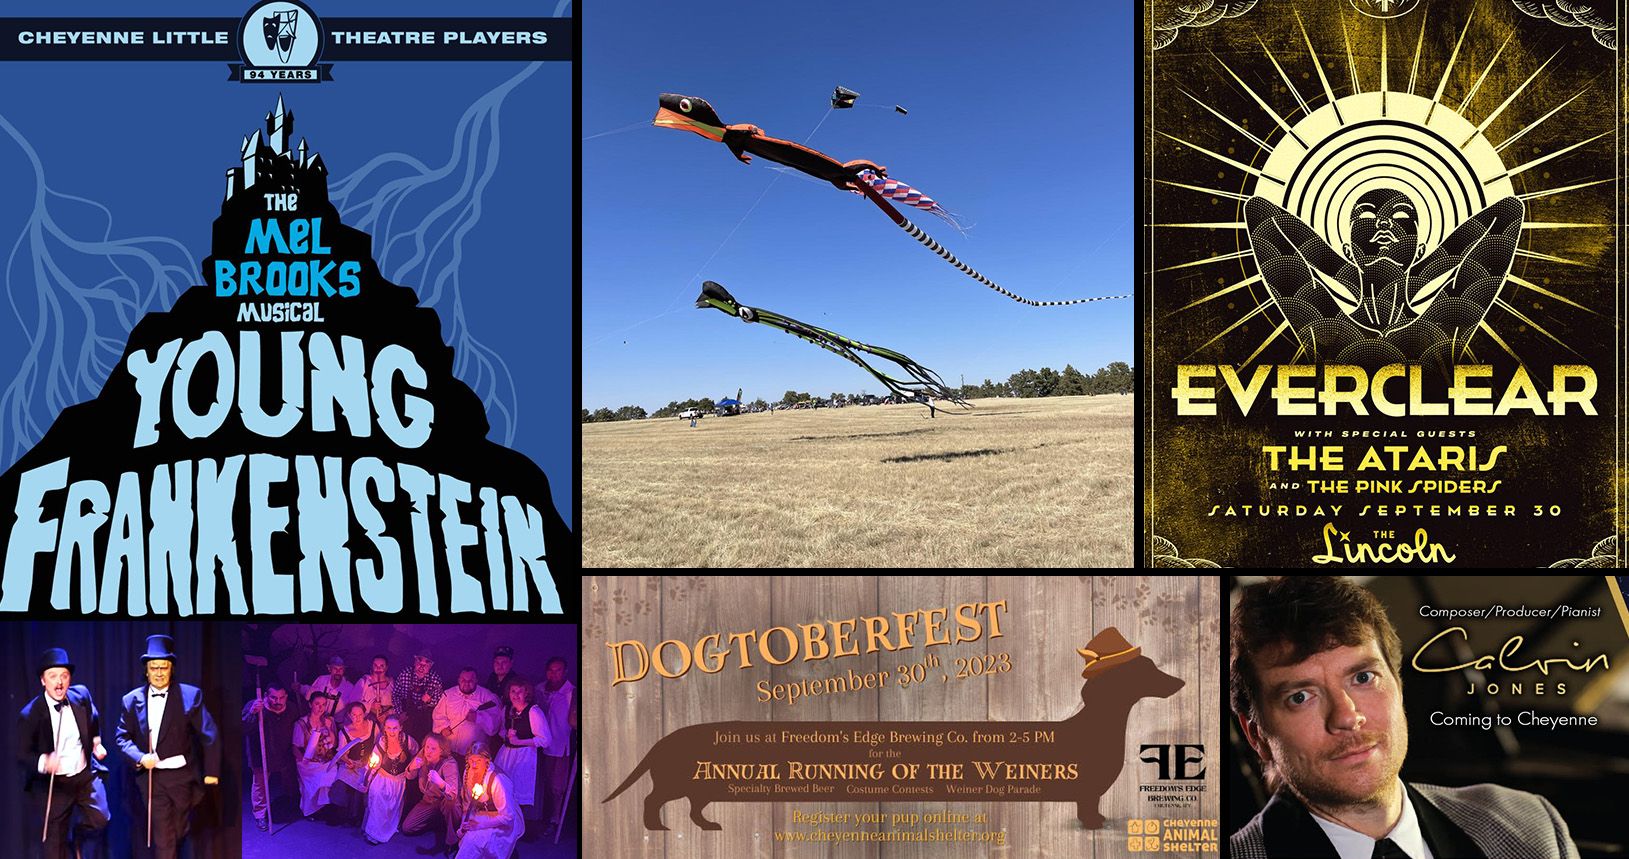 Young Frankenstein, Everclear, Dogtoberfest, Kites and So Much More Happening!